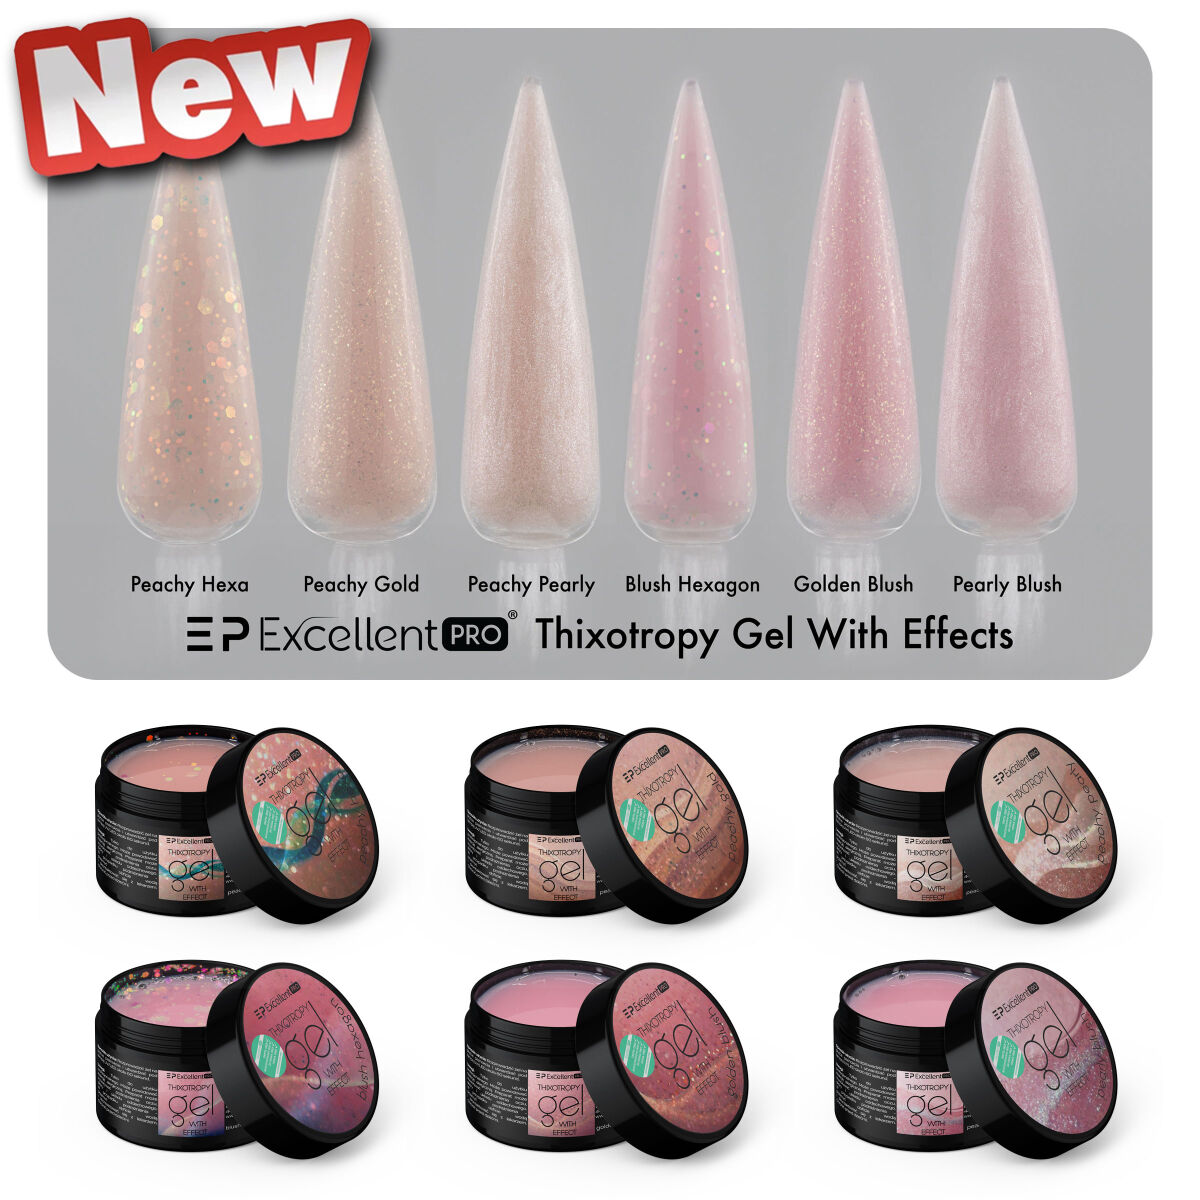 Excellent PRO Thixotropy Gel With Effects